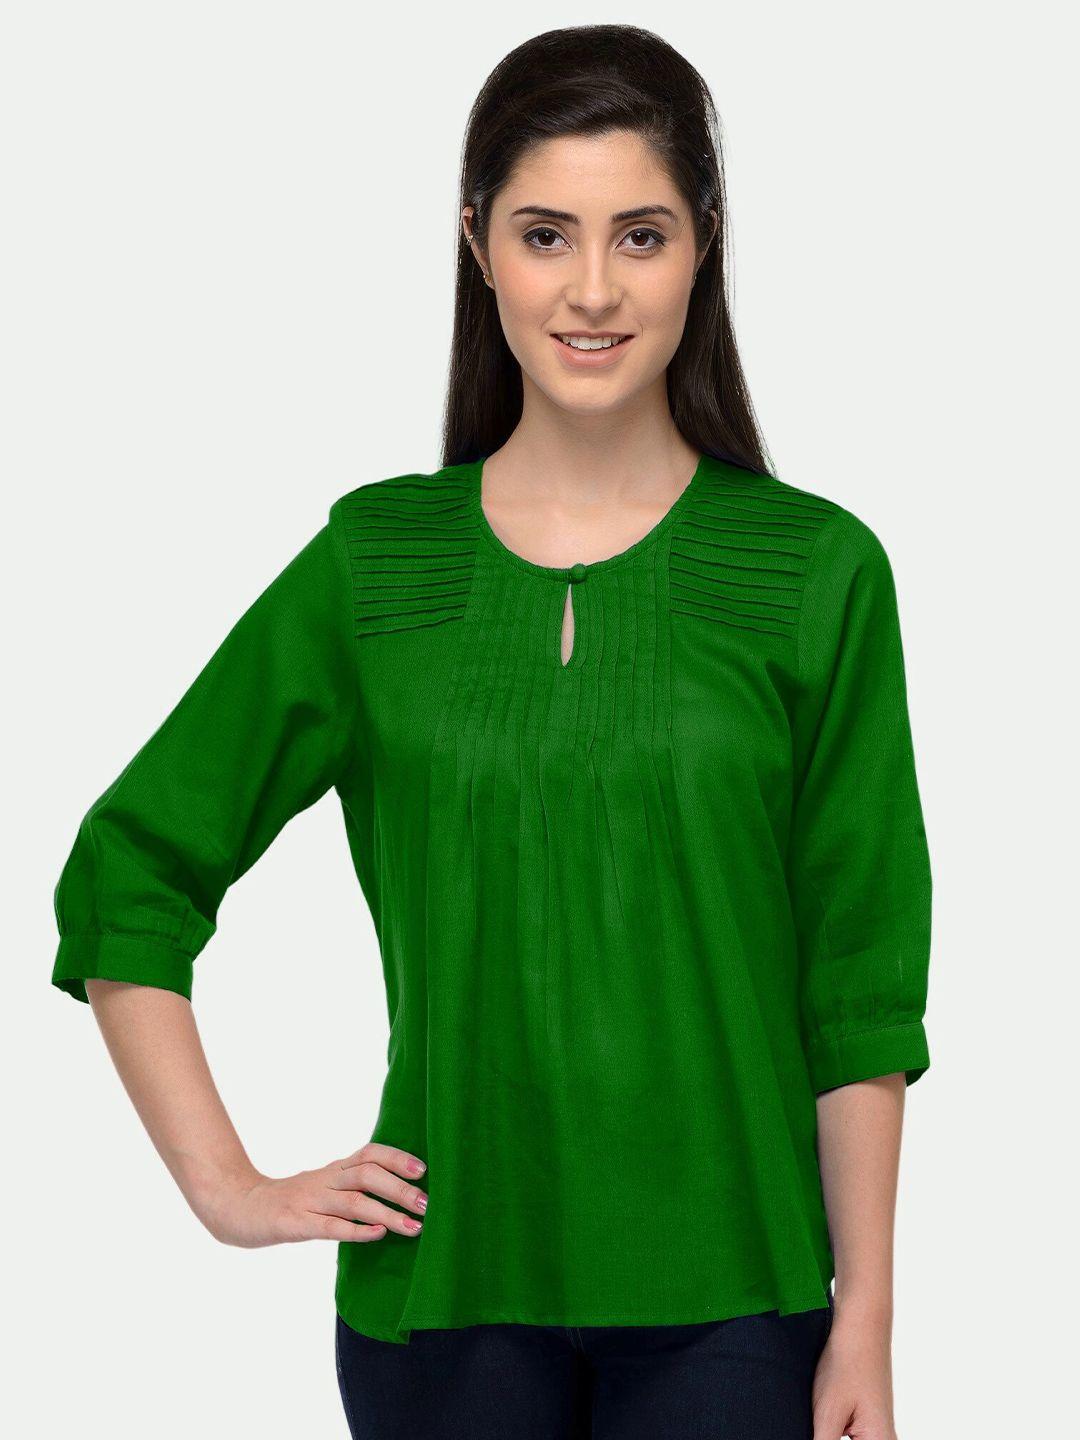 patrorna-women-green-solid-pleated-keyhole-neck-top